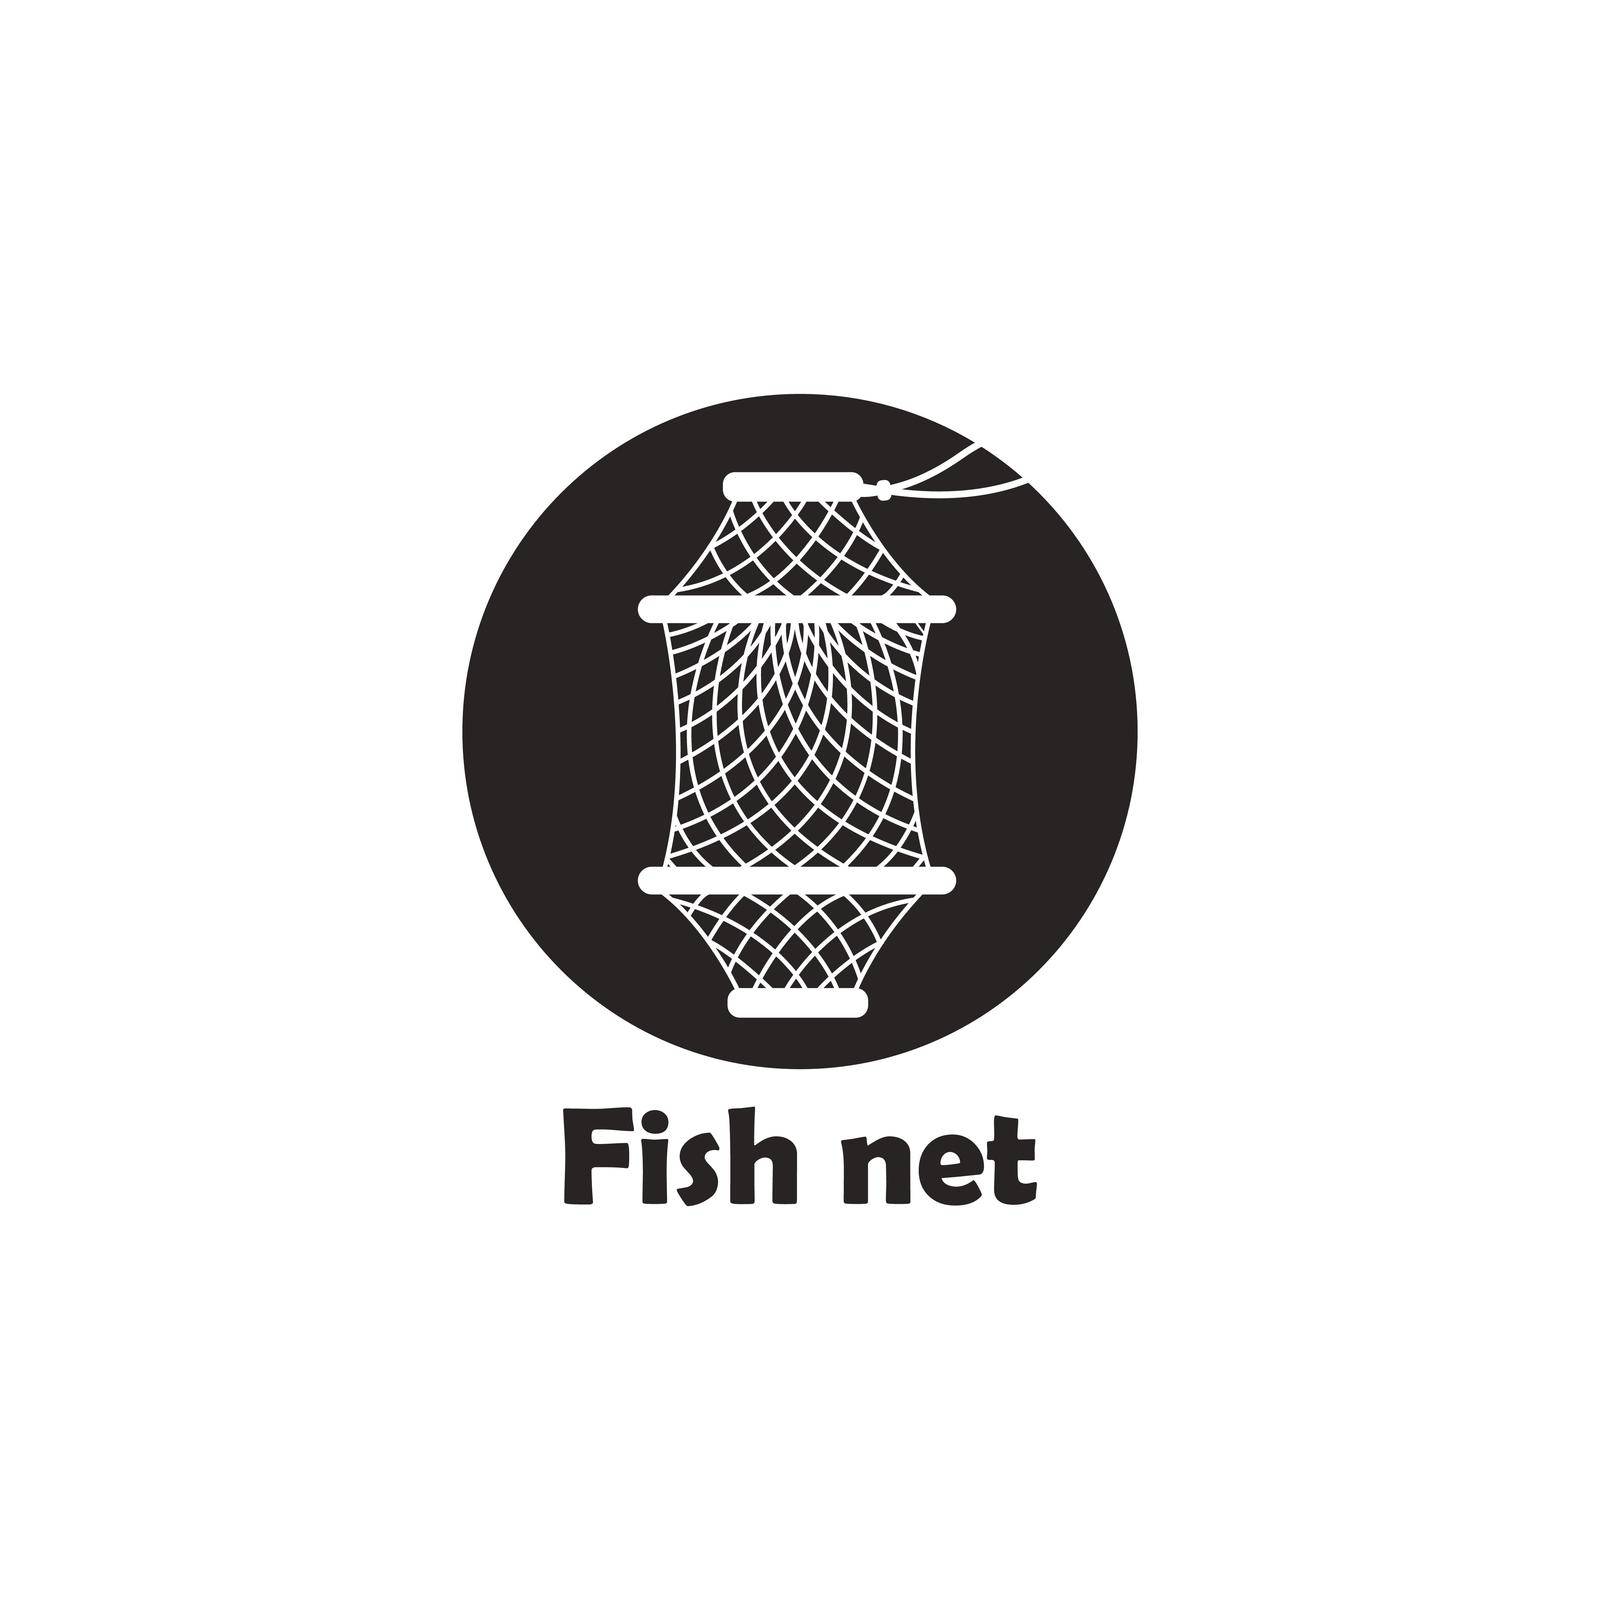 Fish net icon by rnking